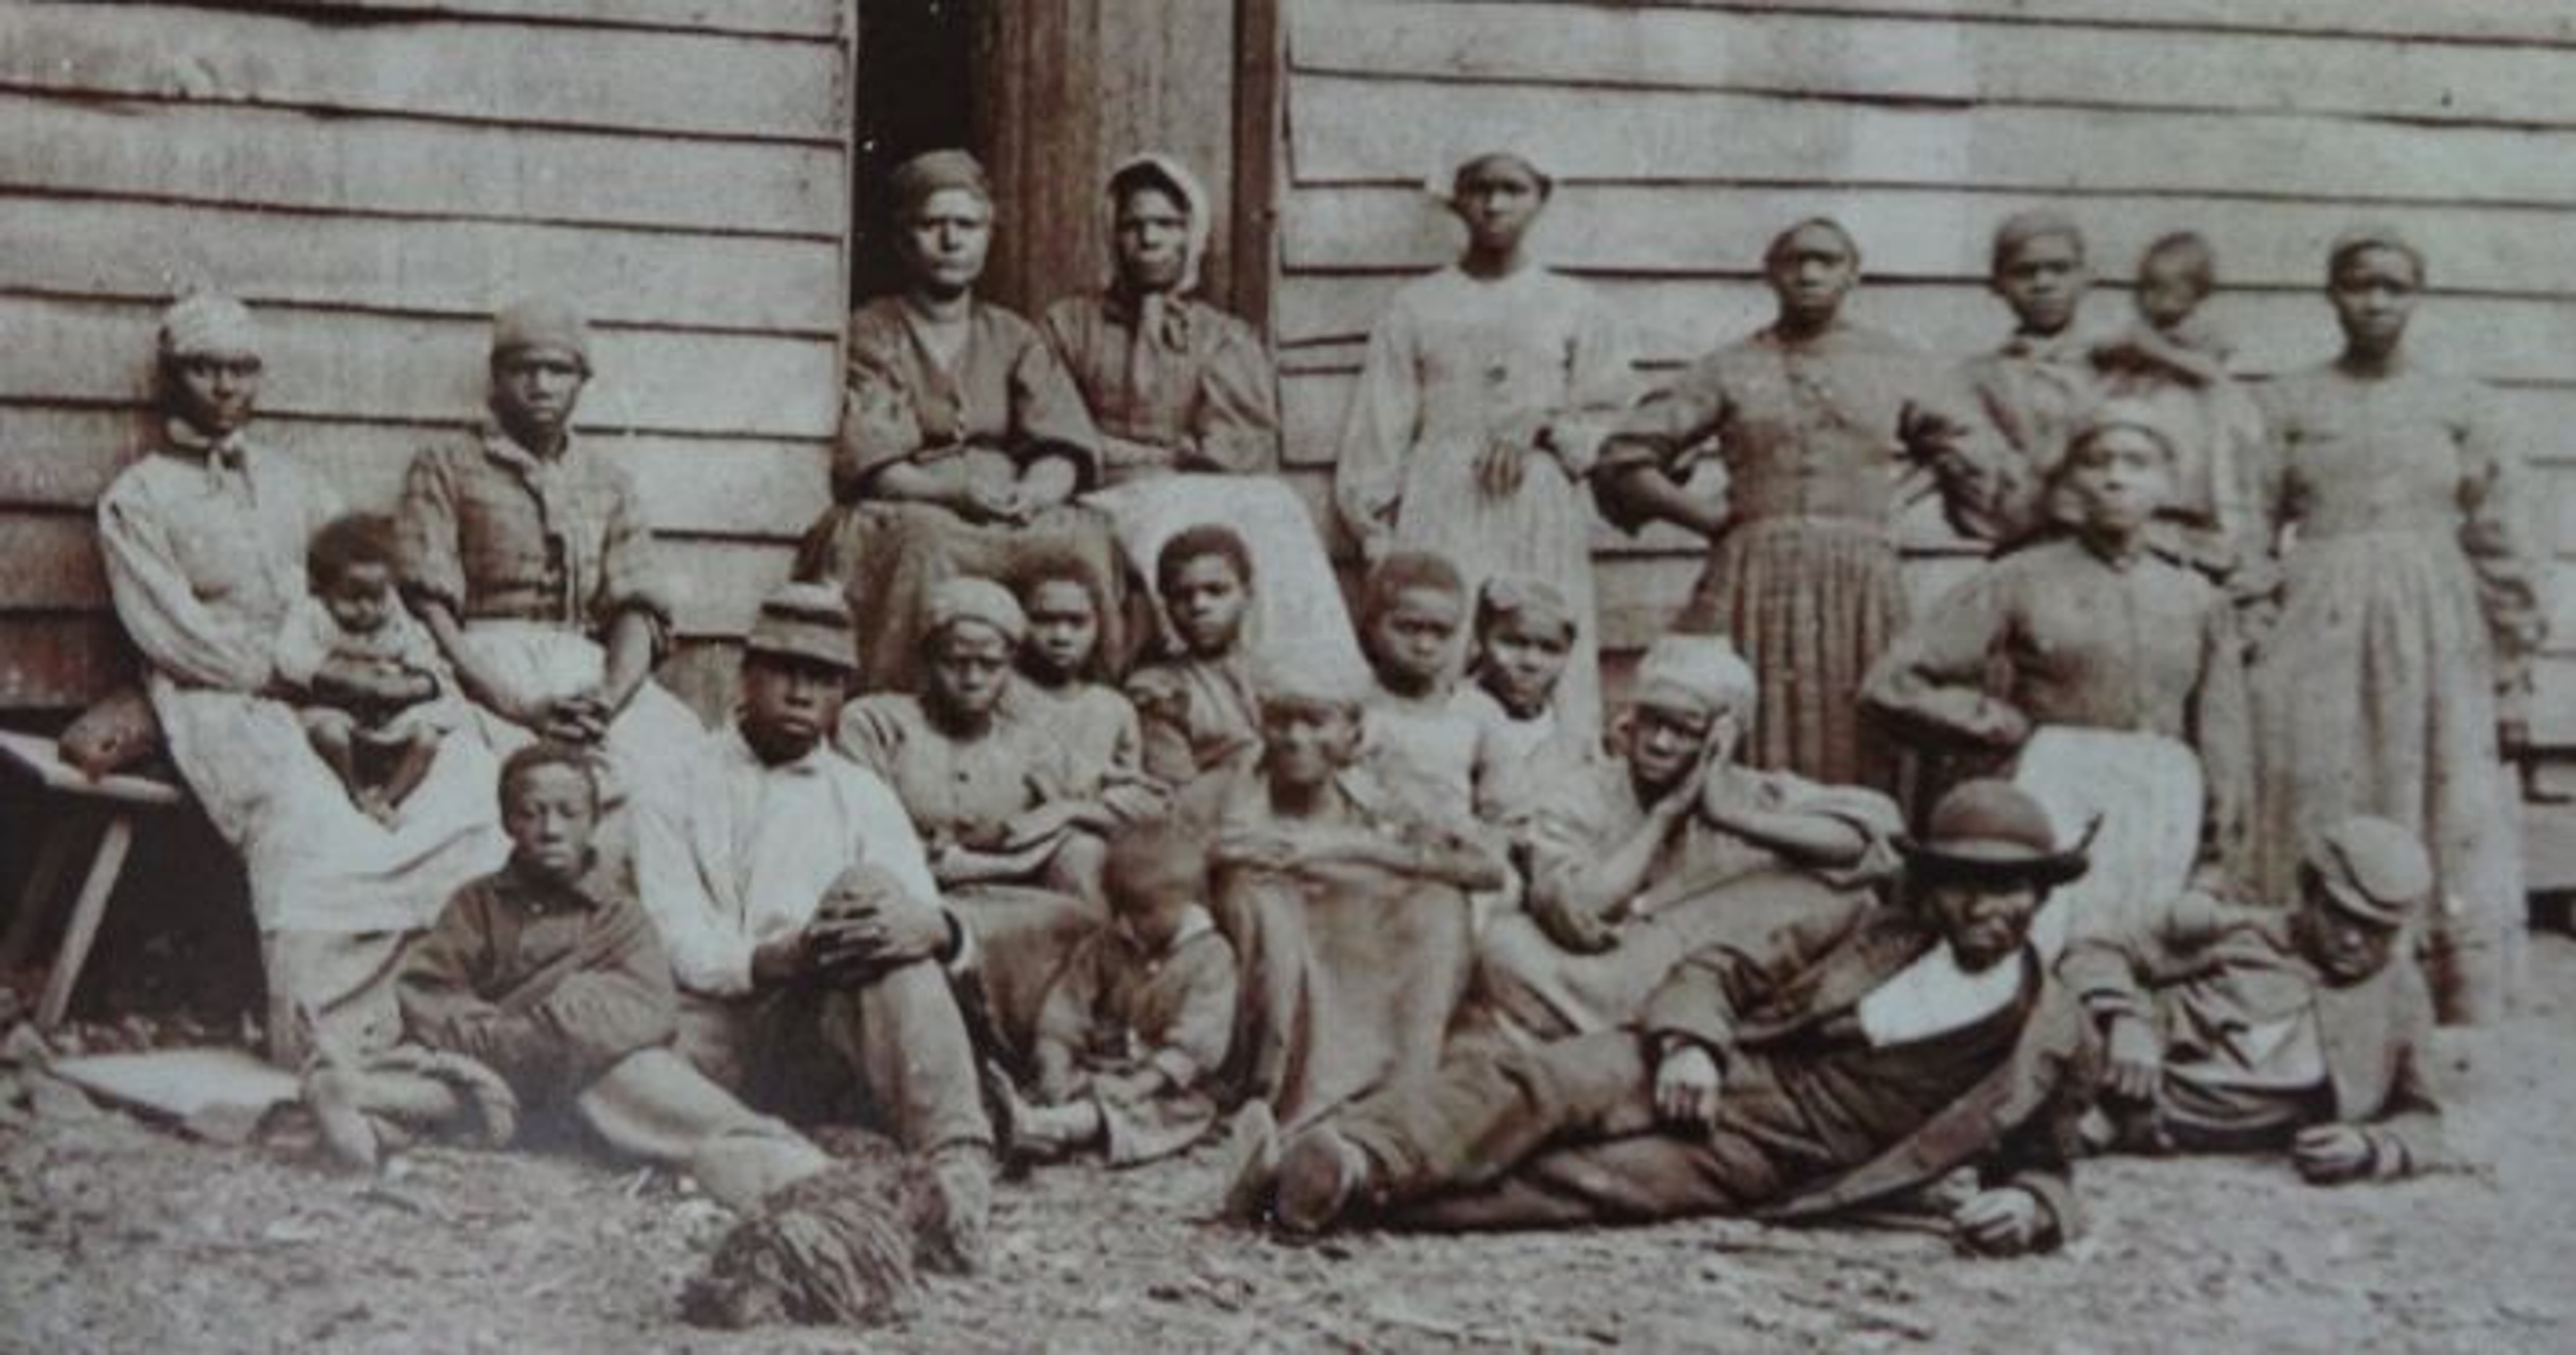 What Is Juneteenth And How Did It Become The 11th US Federal Holiday?